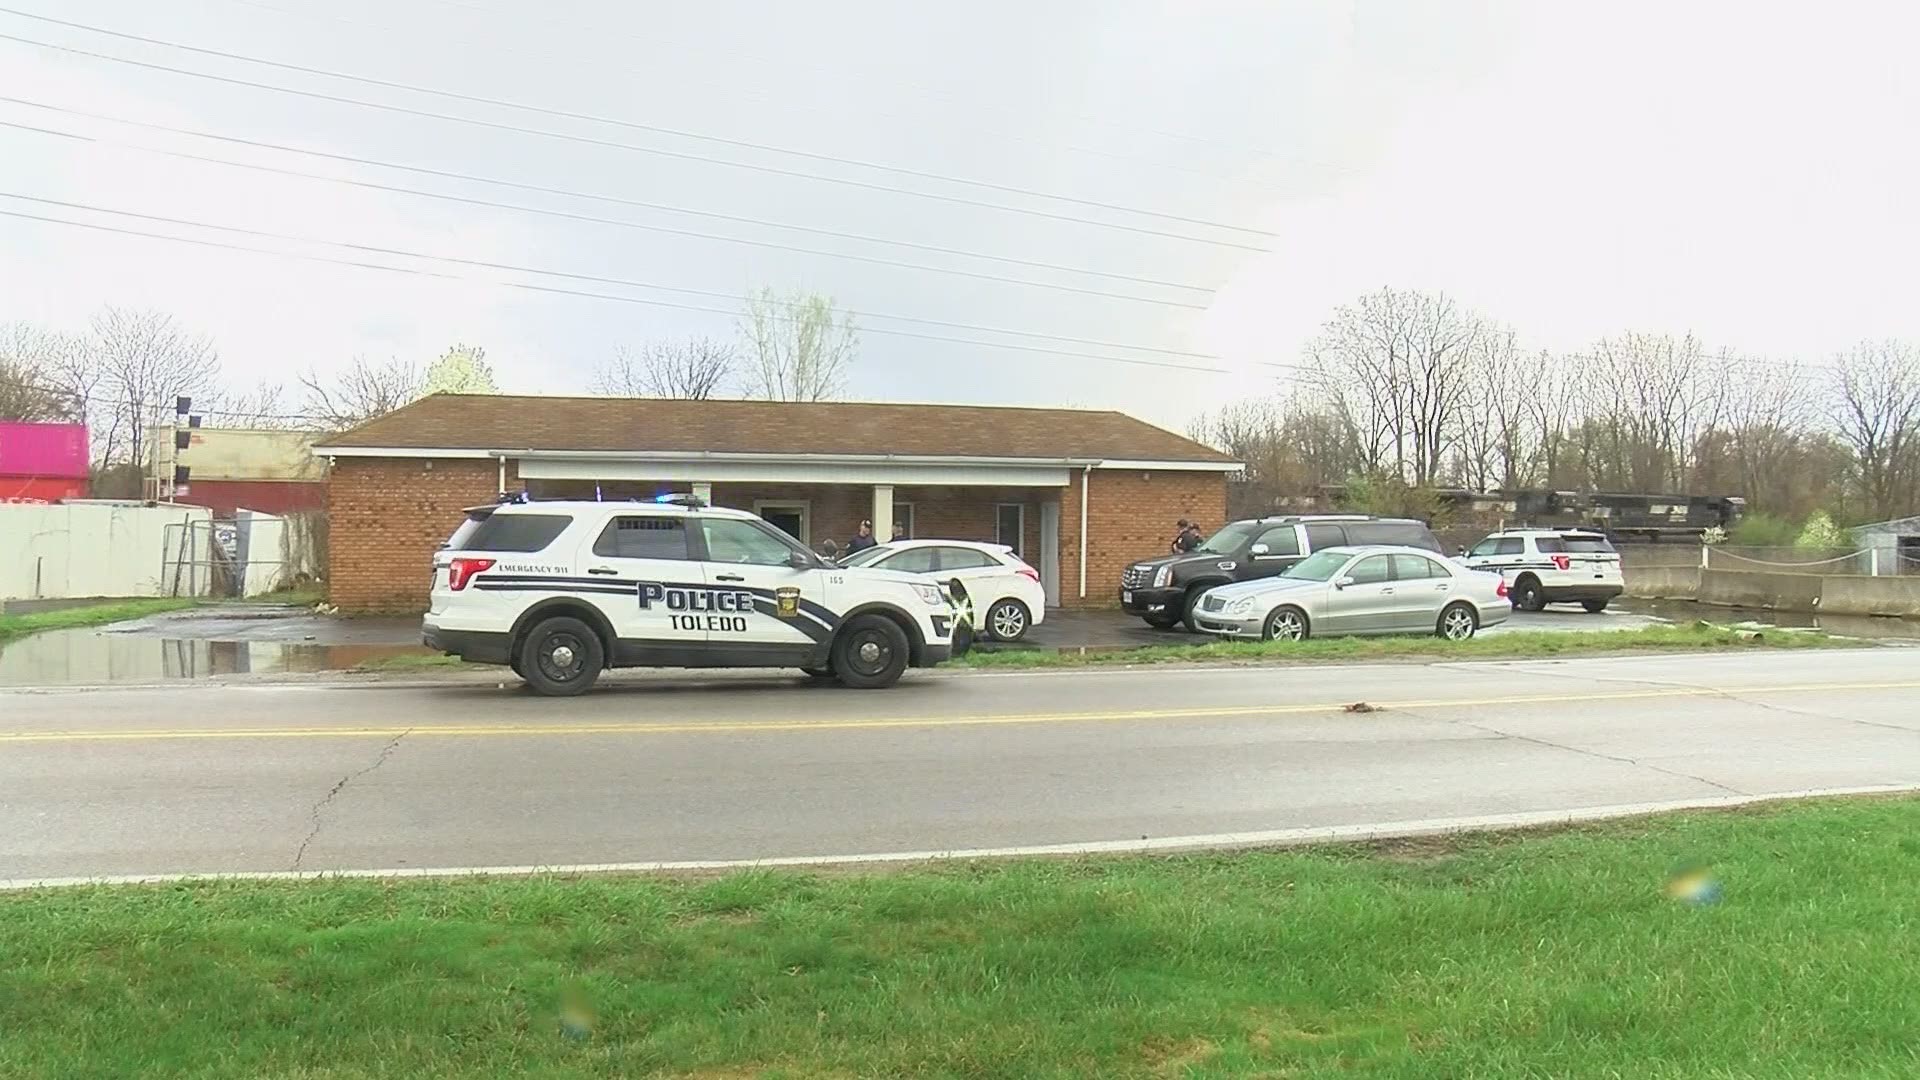 Toledo Police pursued a similar vehicle to the robbers', resulting in a barricaded suspect, but Maumee Police confirmed that car did not belong to the robbers.